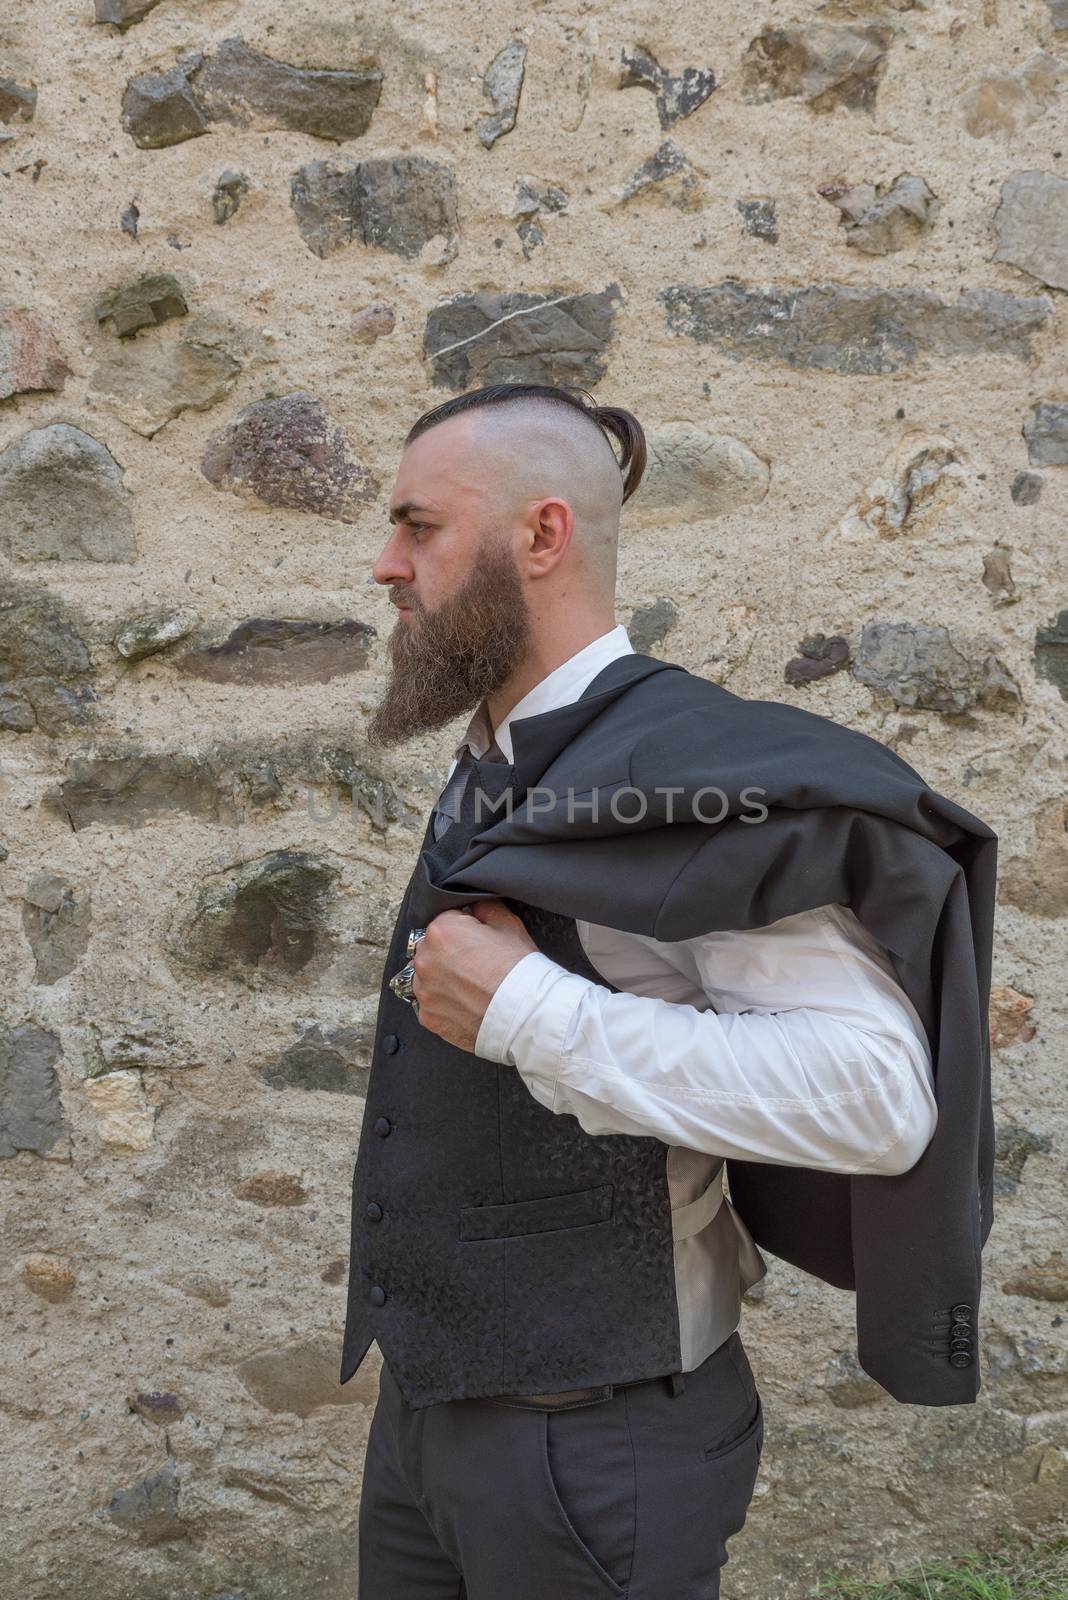 Man with long beard wears a dark elegant suit posing in front of a stone wall